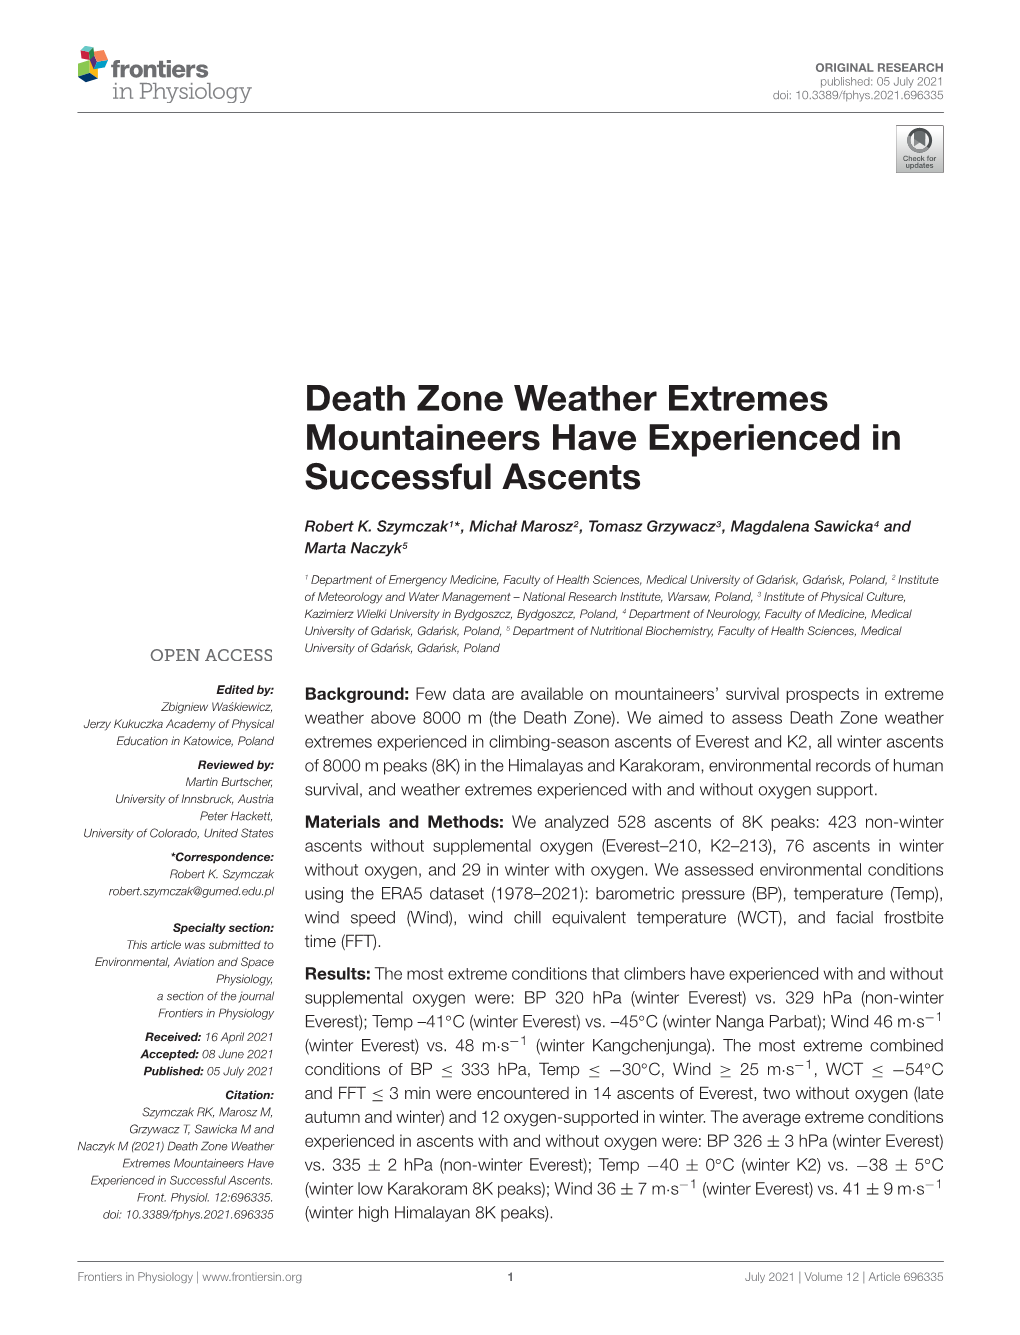 Robert K. Szymczak, Et Al., Death Zone Weather Extremes Mountaineers Have Experienced in Successful Ascents, Frontiers